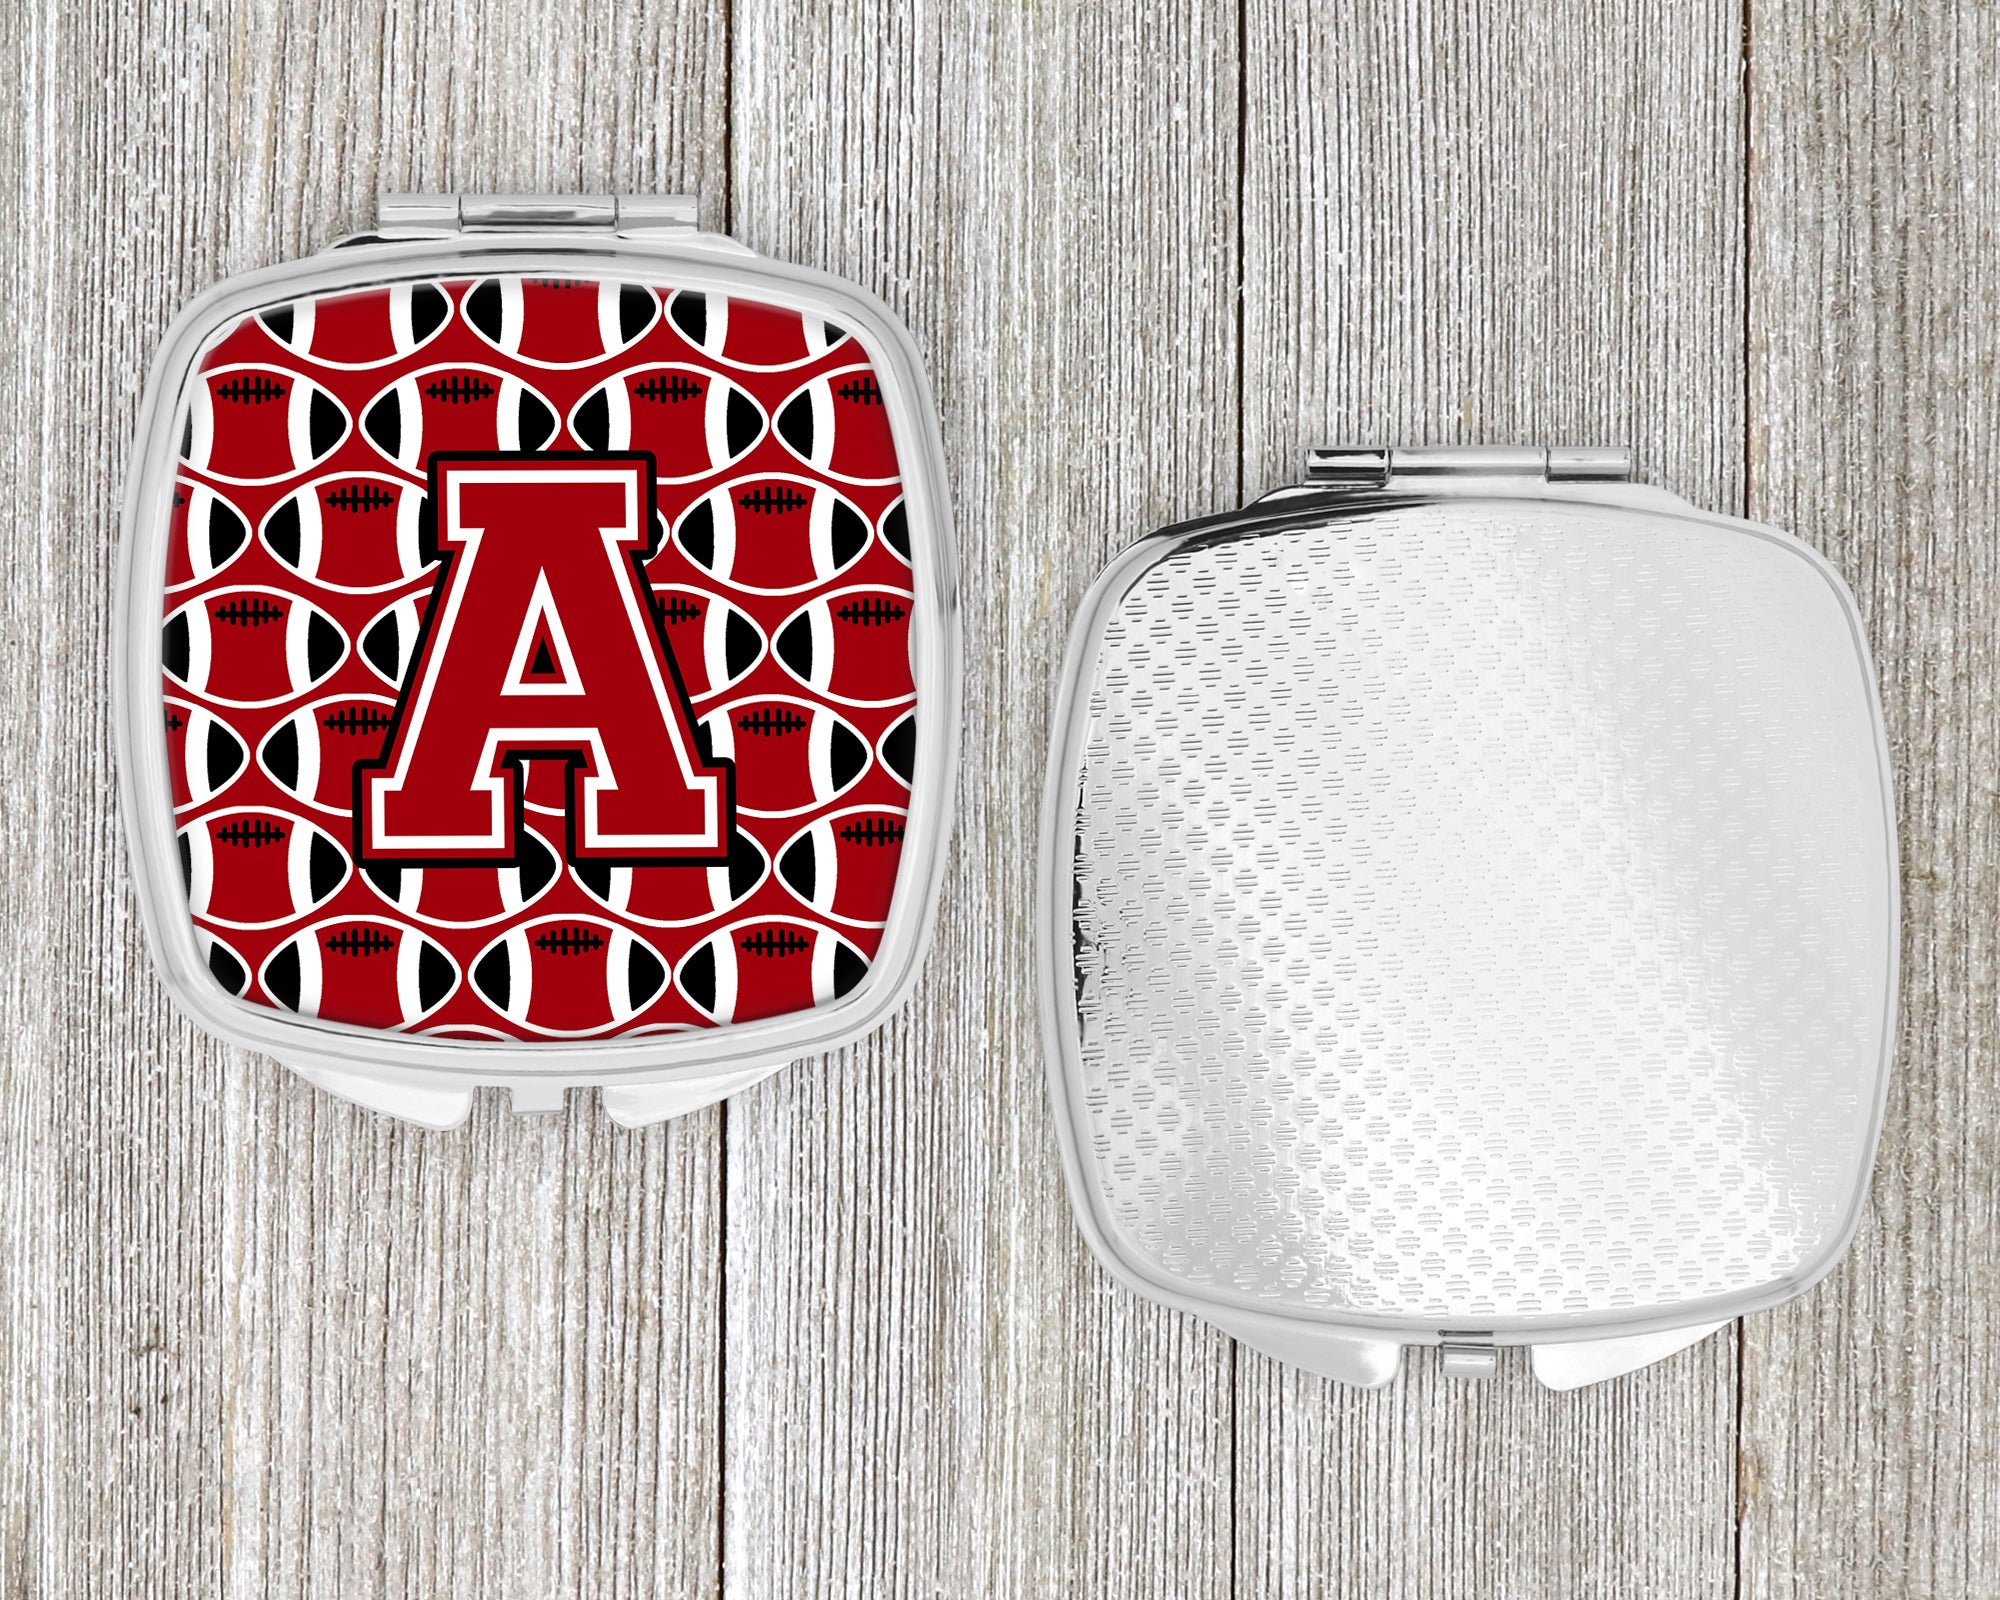 Letter A Football Red, Black and White Compact Mirror CJ1073-ASCM  the-store.com.